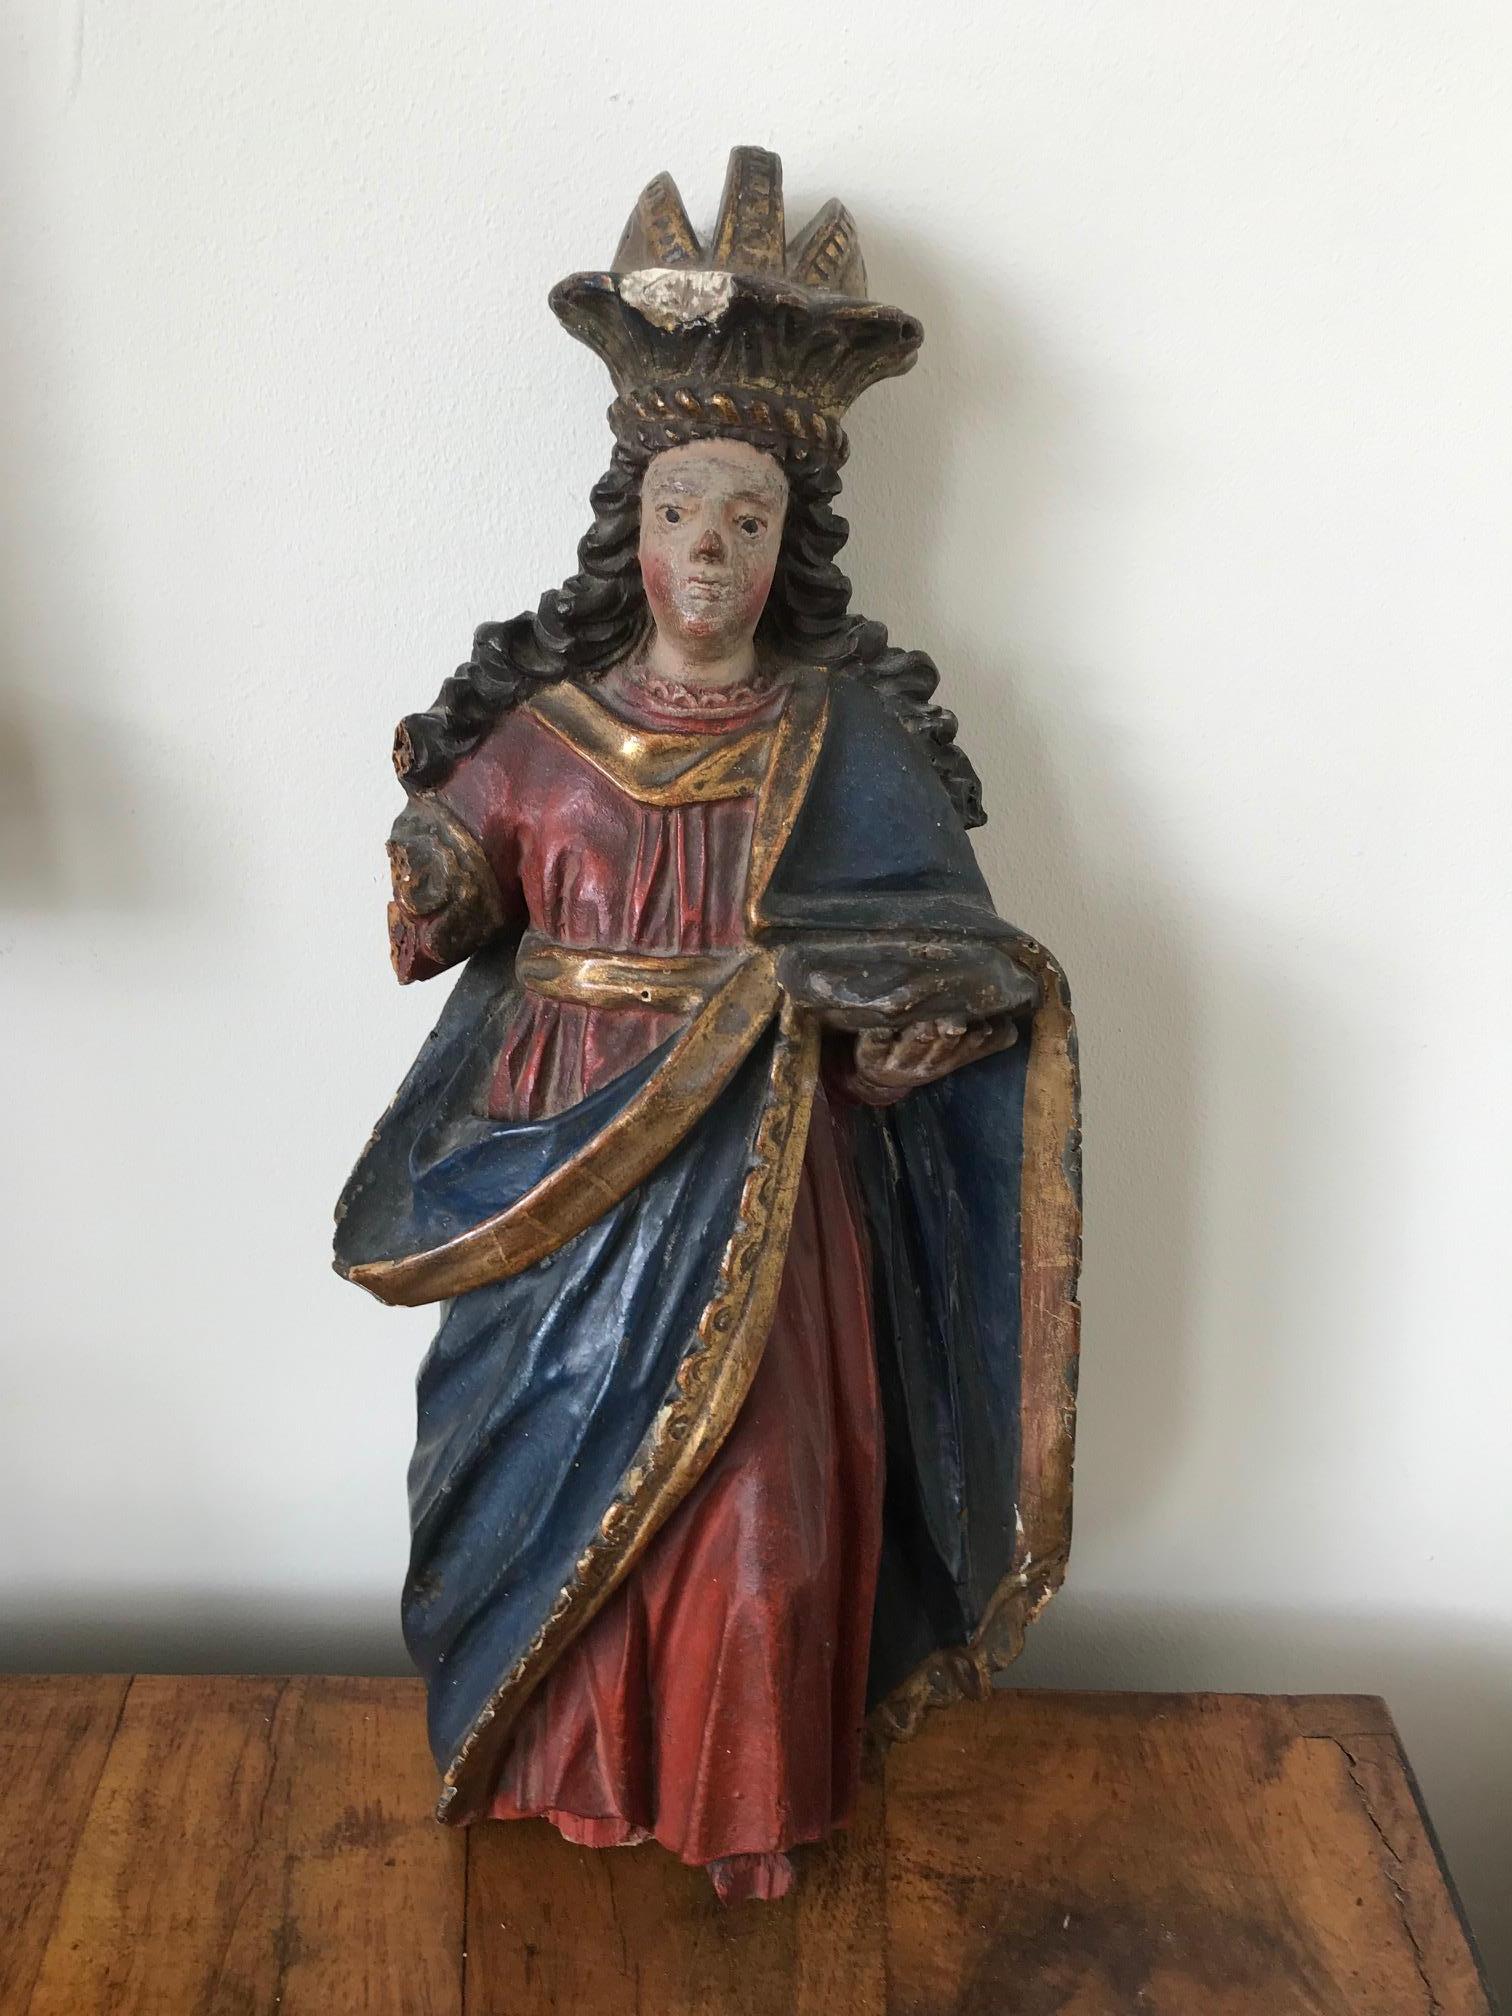 A wonderful possibly Italian early 18th century Baroque polychrome statue of a crowned saint. Wonderful naive carving with remnants of good color and gilding. Some obvious damage and losses which should be visible in the photos. Would most likely